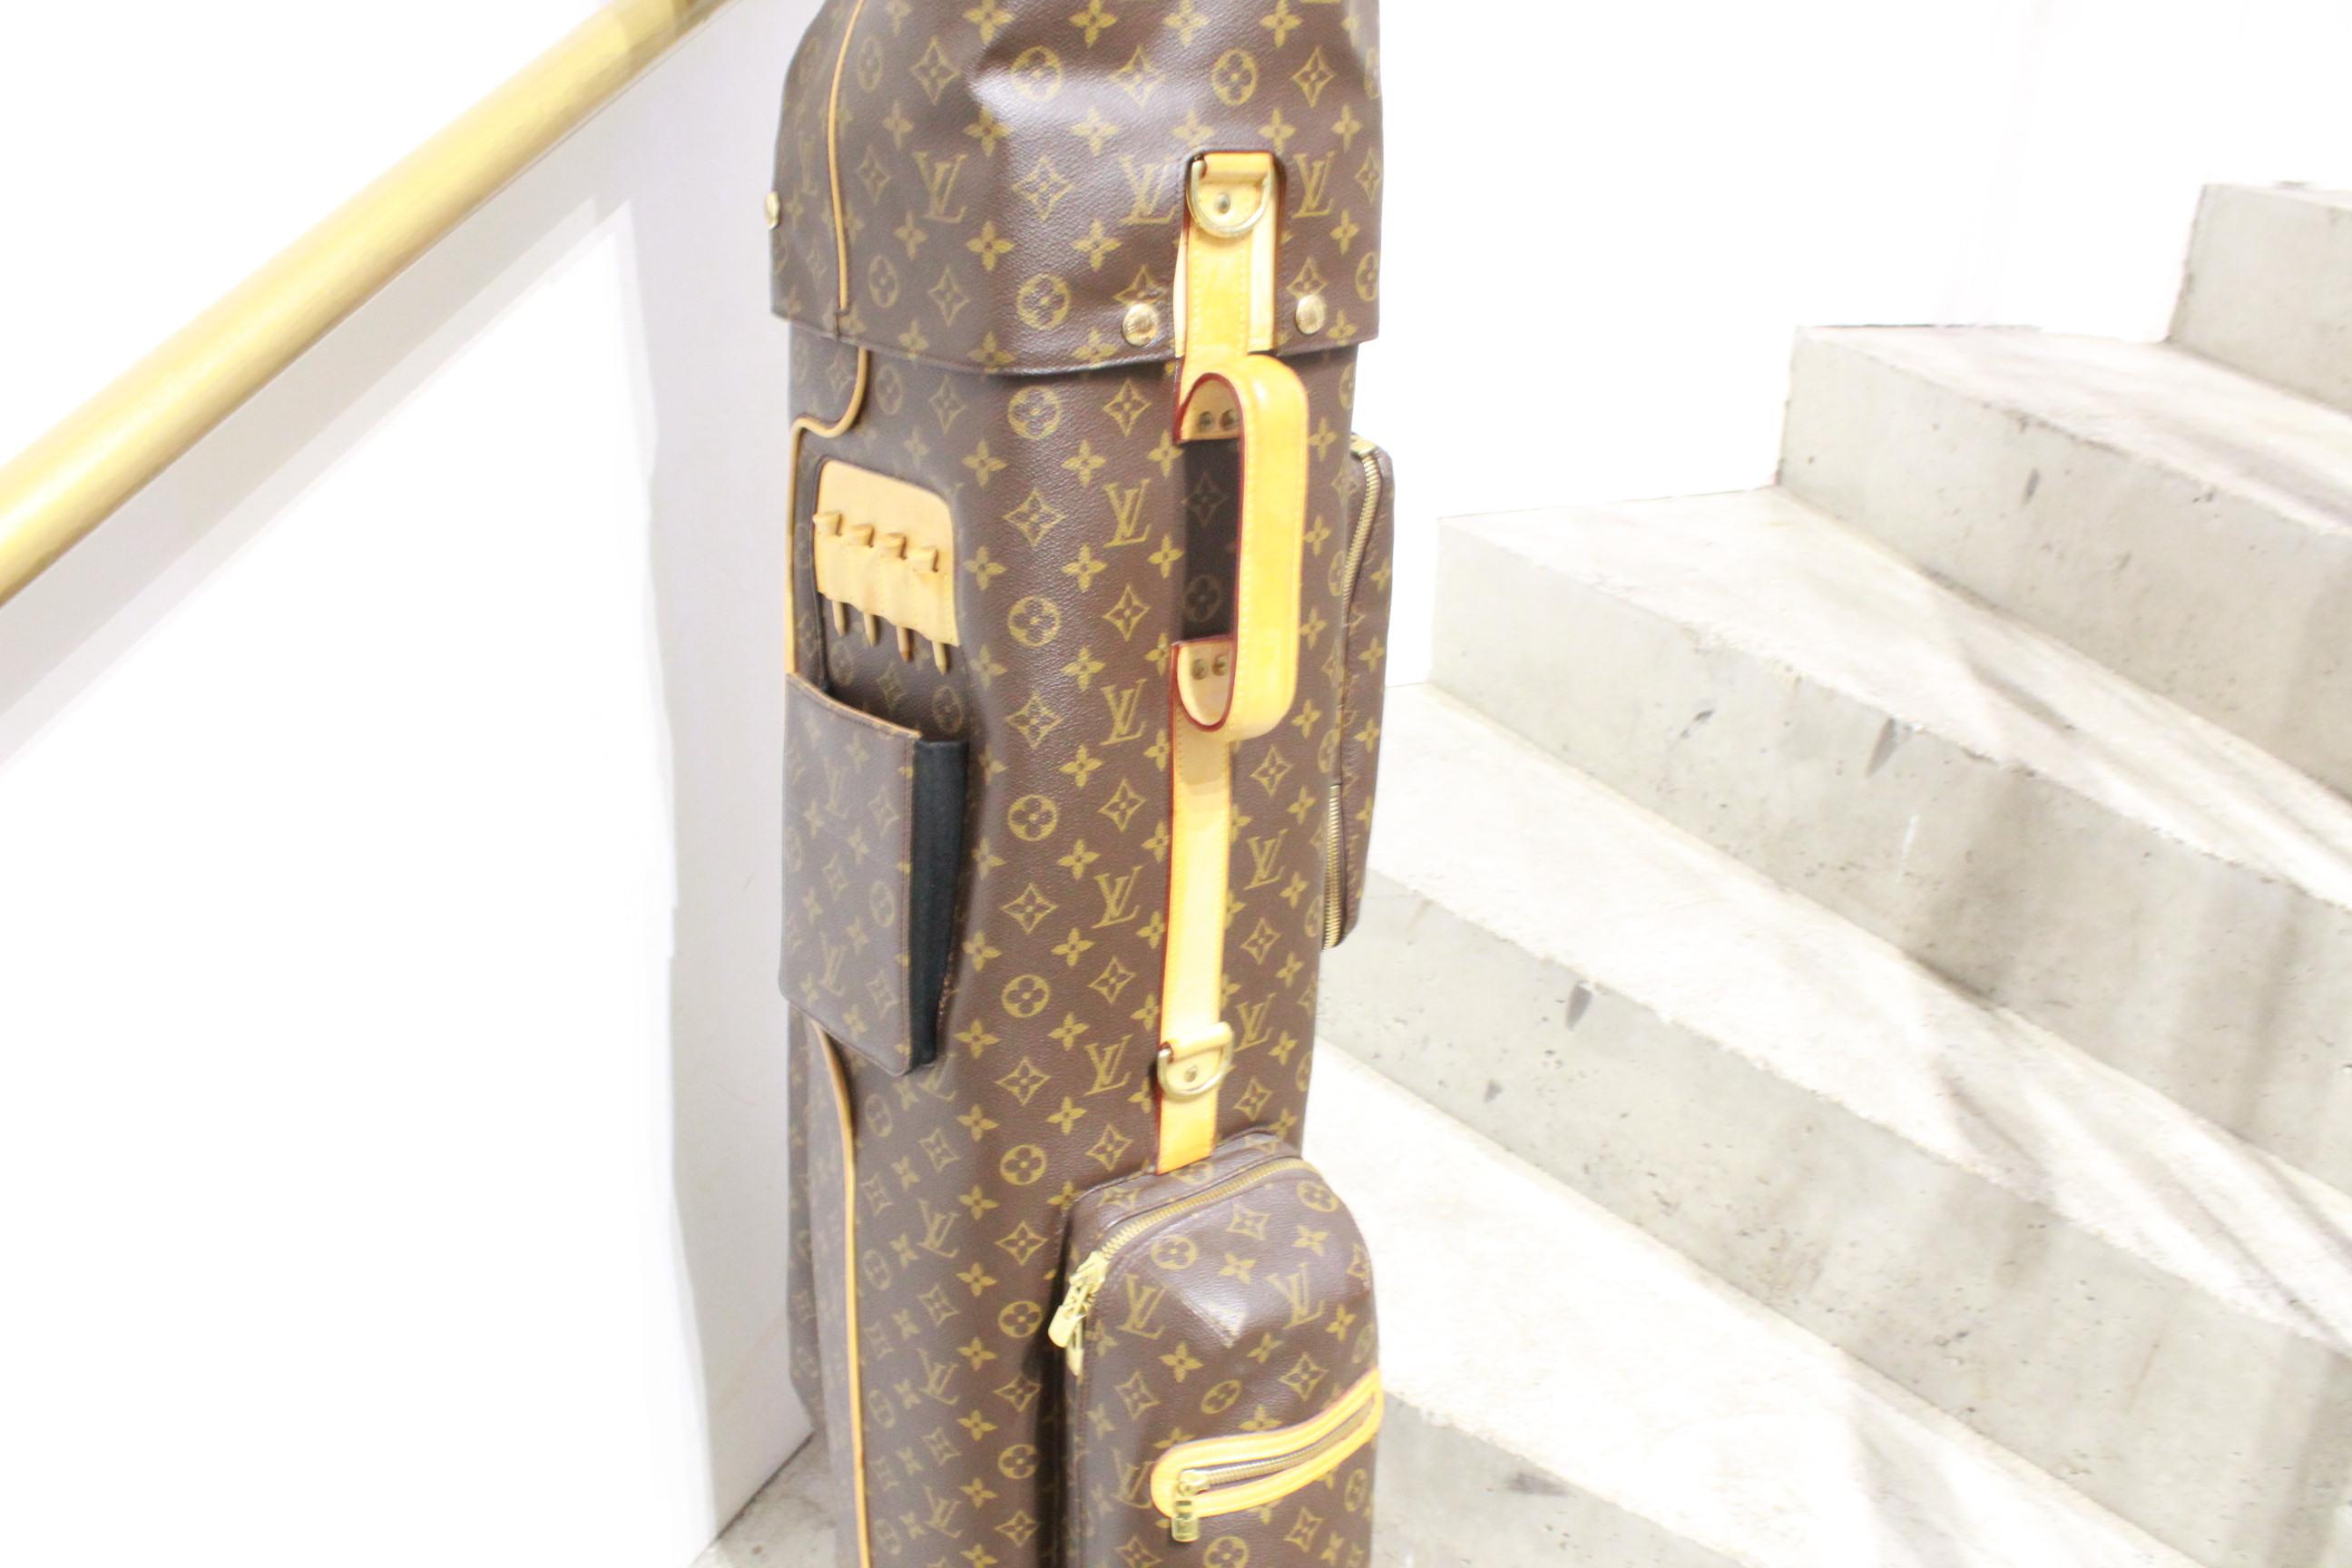 Rare Louis Vuitton golf bag in monogram canvas.
Very rare vintage piece.
Goond condition, A screw is missing on the inside for the part that separates it. 
123cm x 20cm x 20cm

